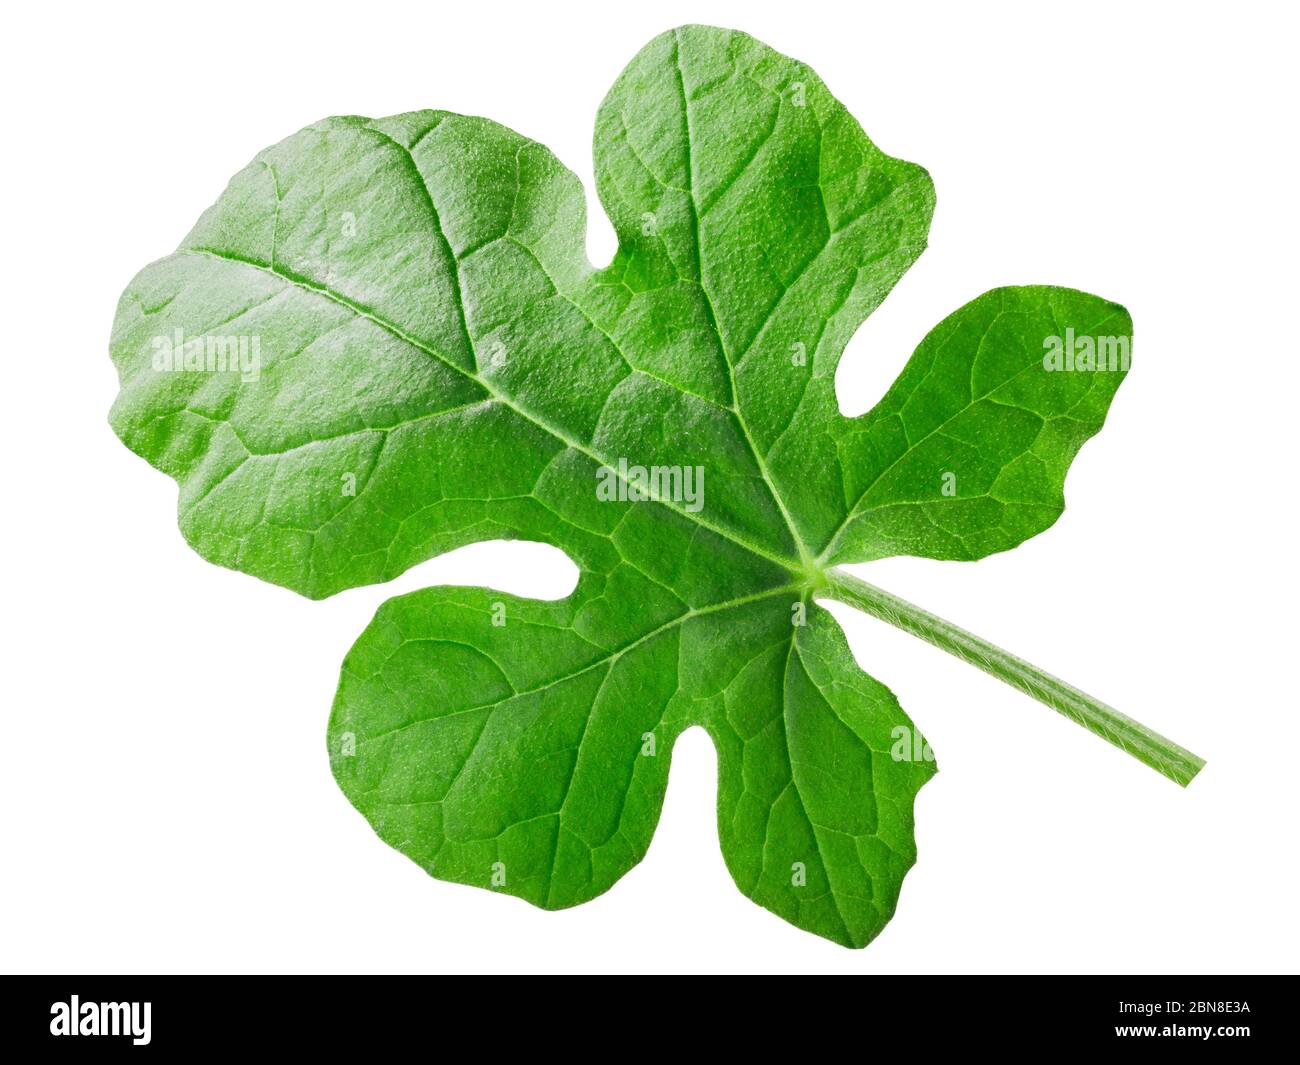 Young leaf of Watermelon (Citrullus lanatus), isolated Stock Photo